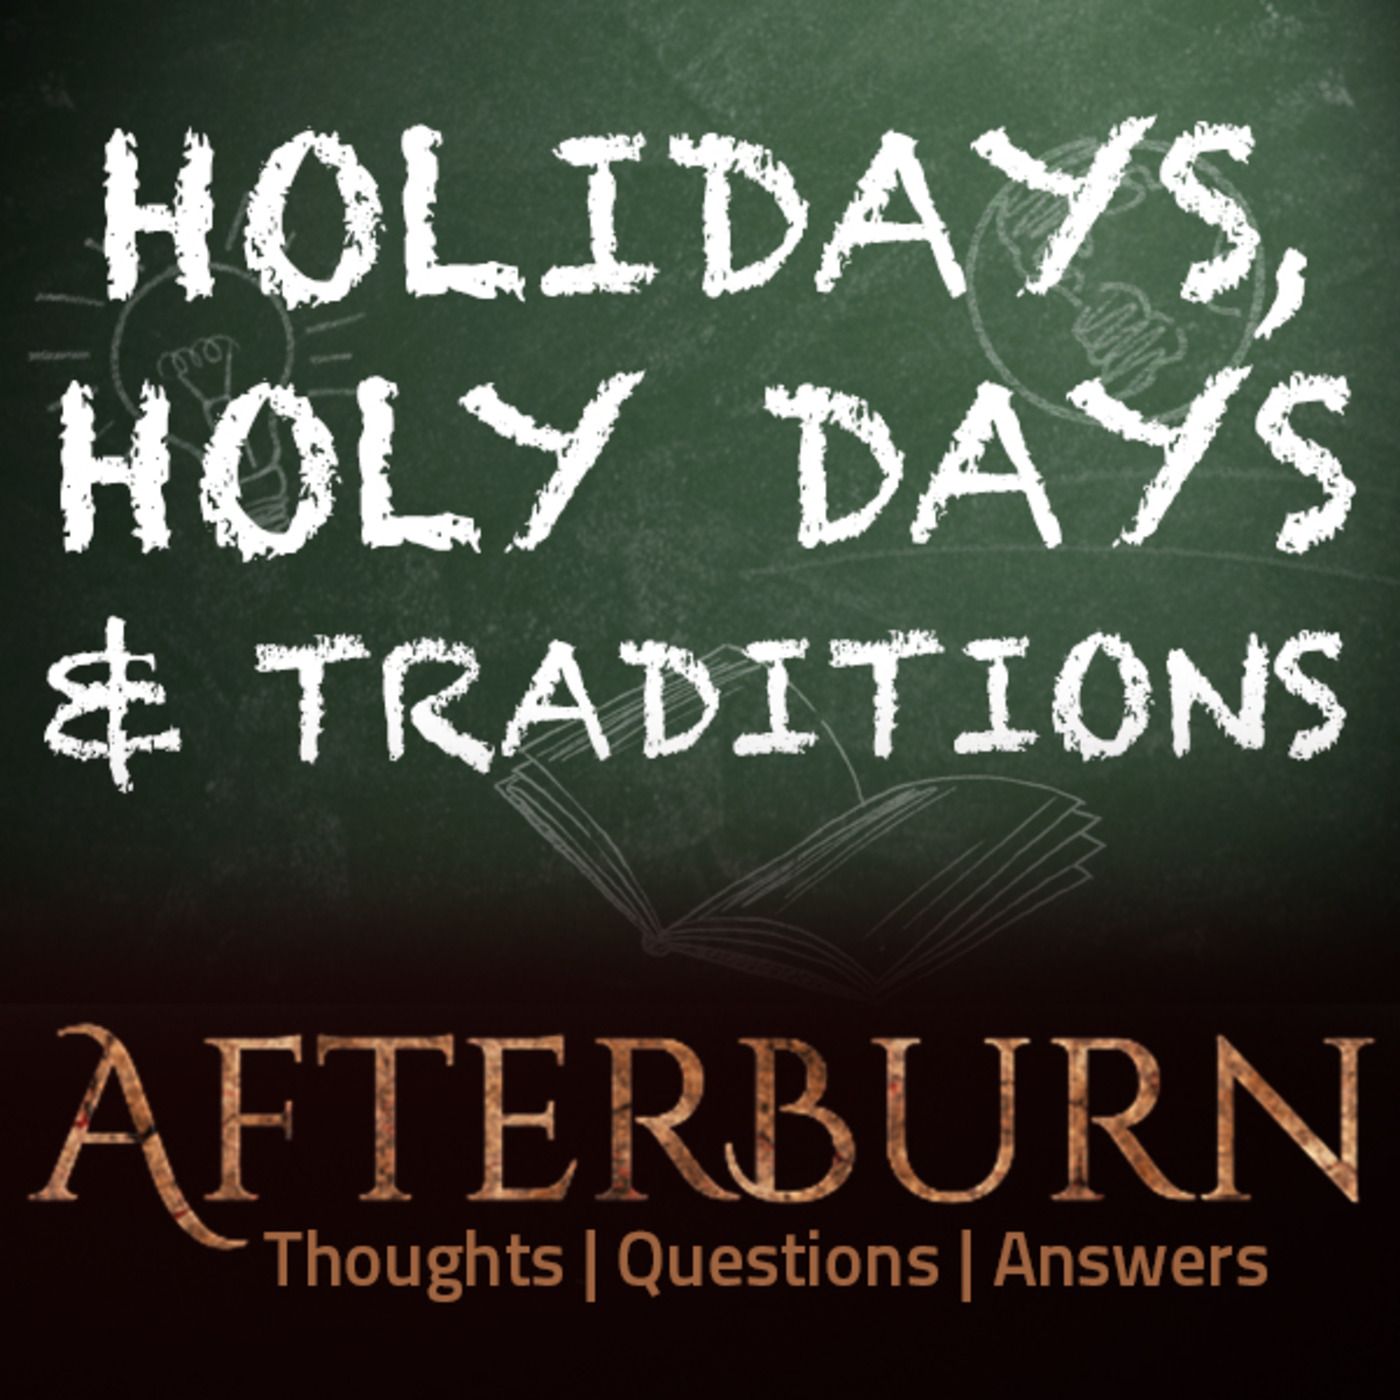 Episode 594: Afterburn | Thoughts, Q&A on Holidays, Holy Days & Traditions